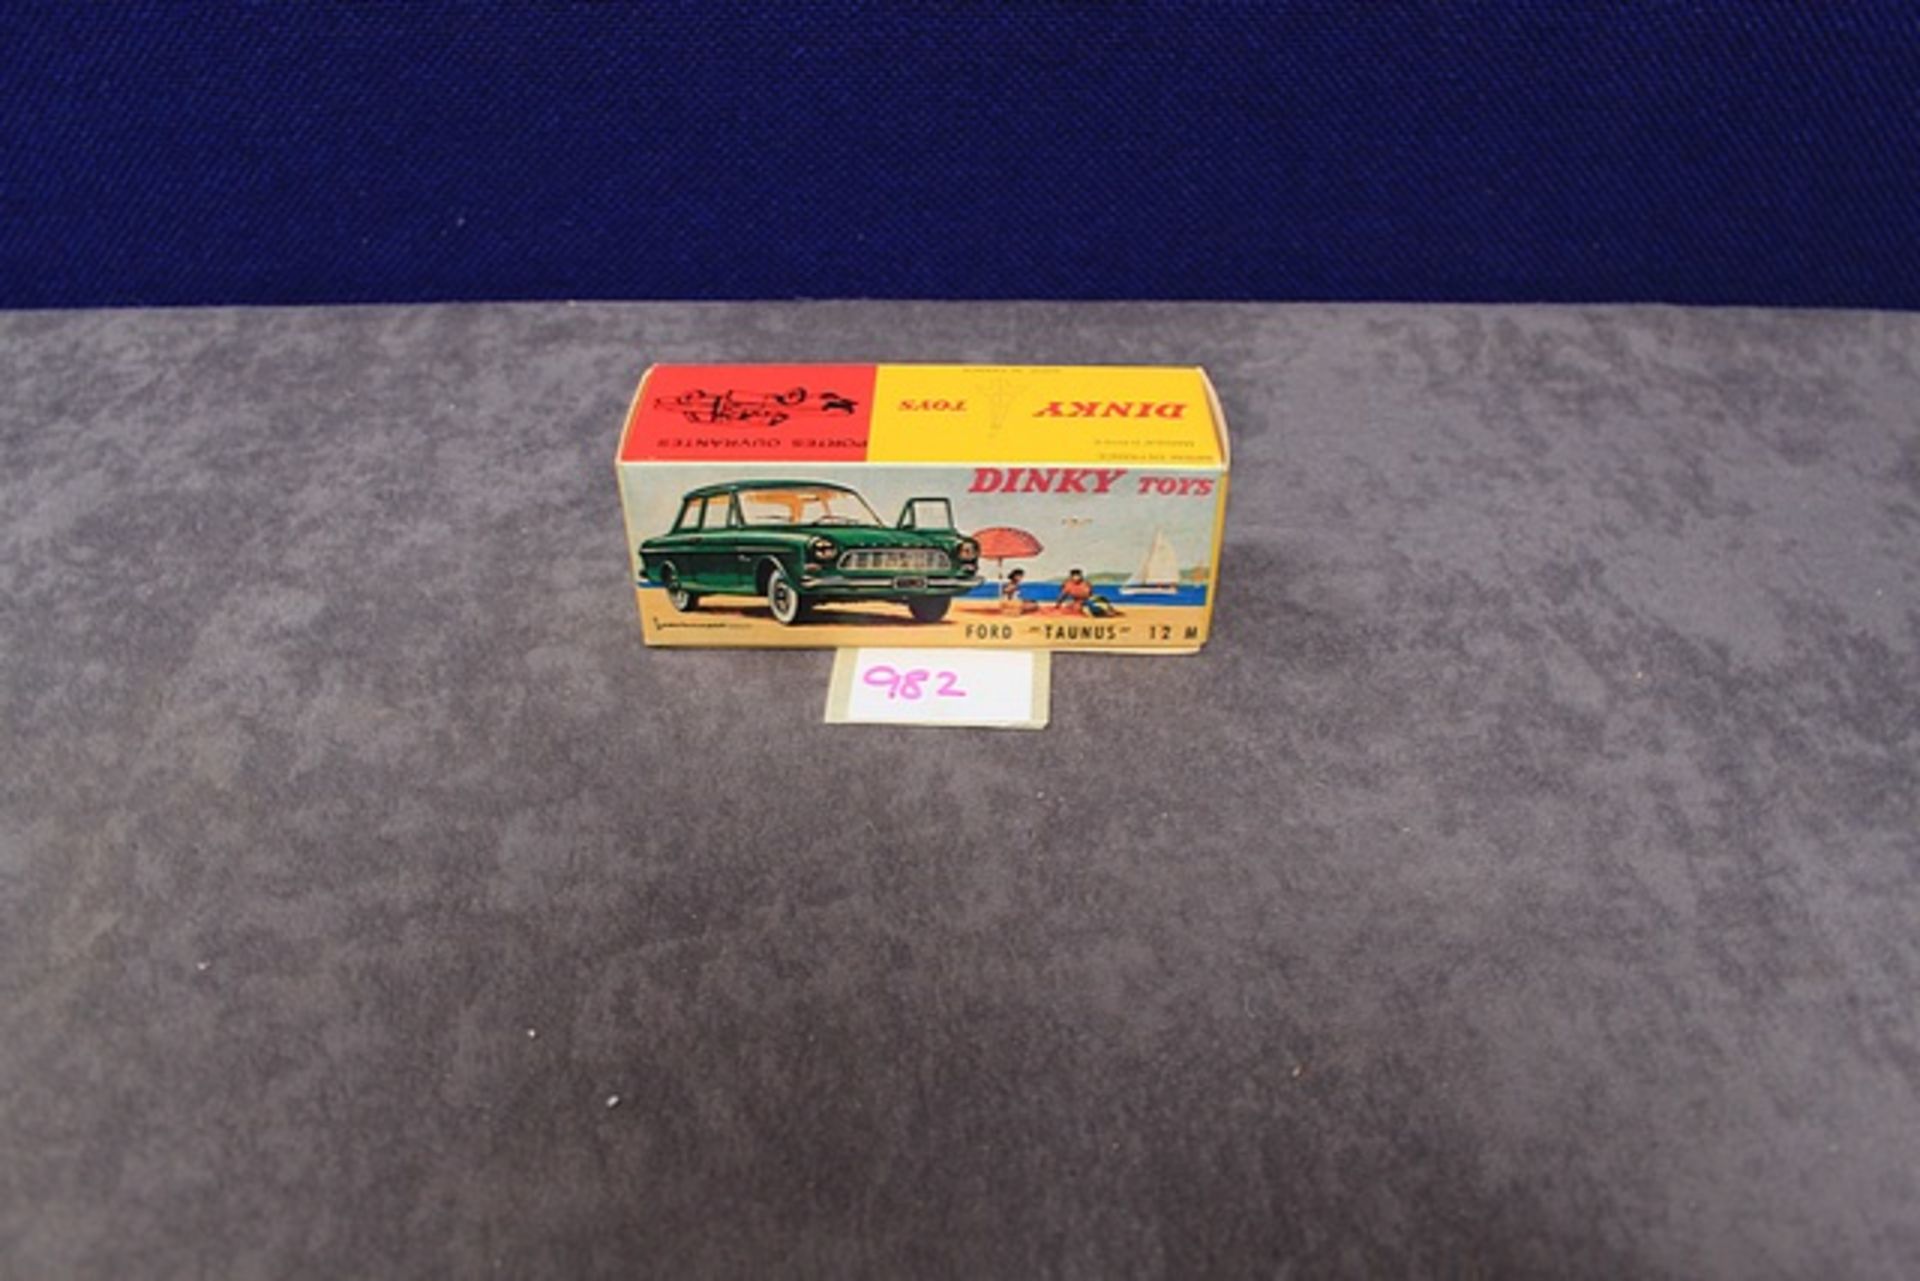 Mint French Dinky Diecast # 538 Ford Taunus 12M In Turquoise Blue In High Quality Repro Boxes - Image 3 of 3